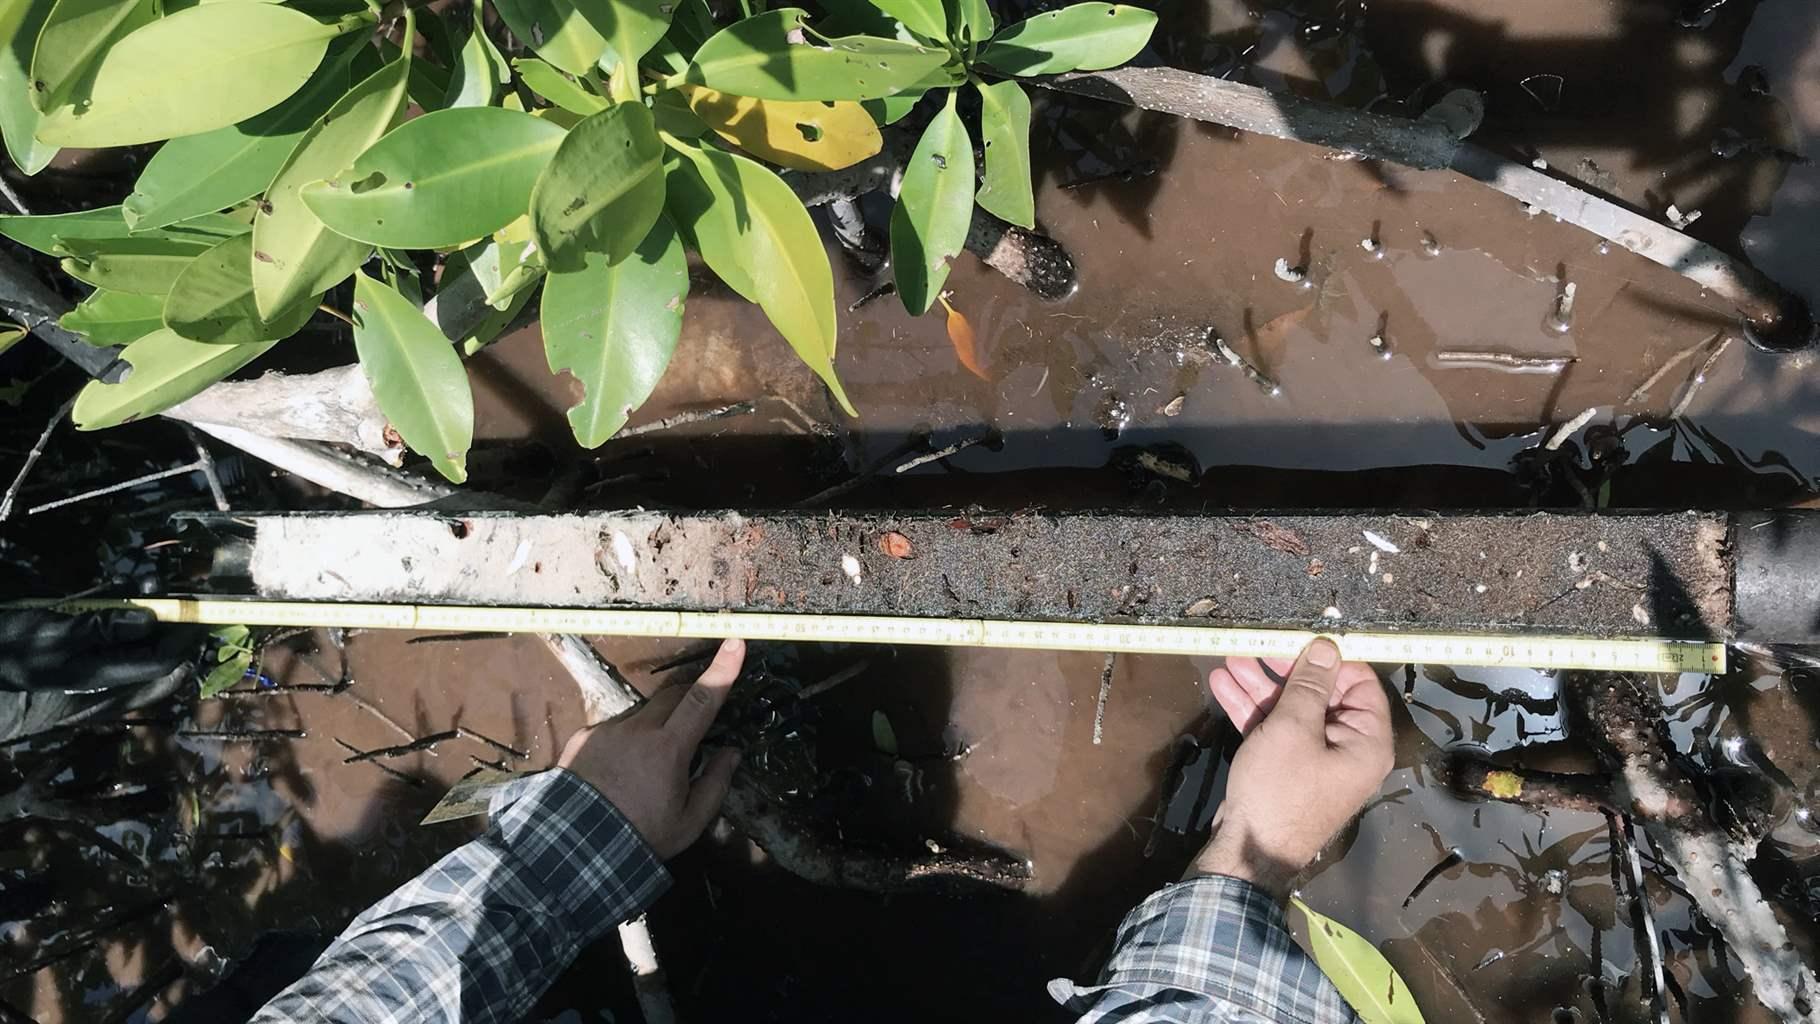 After taking a core, scientists measure the full length of soil collected. Because mangroves accumulate carbon slowly over time, a 1-meter core can contain carbon deposited well over 100 years ago.